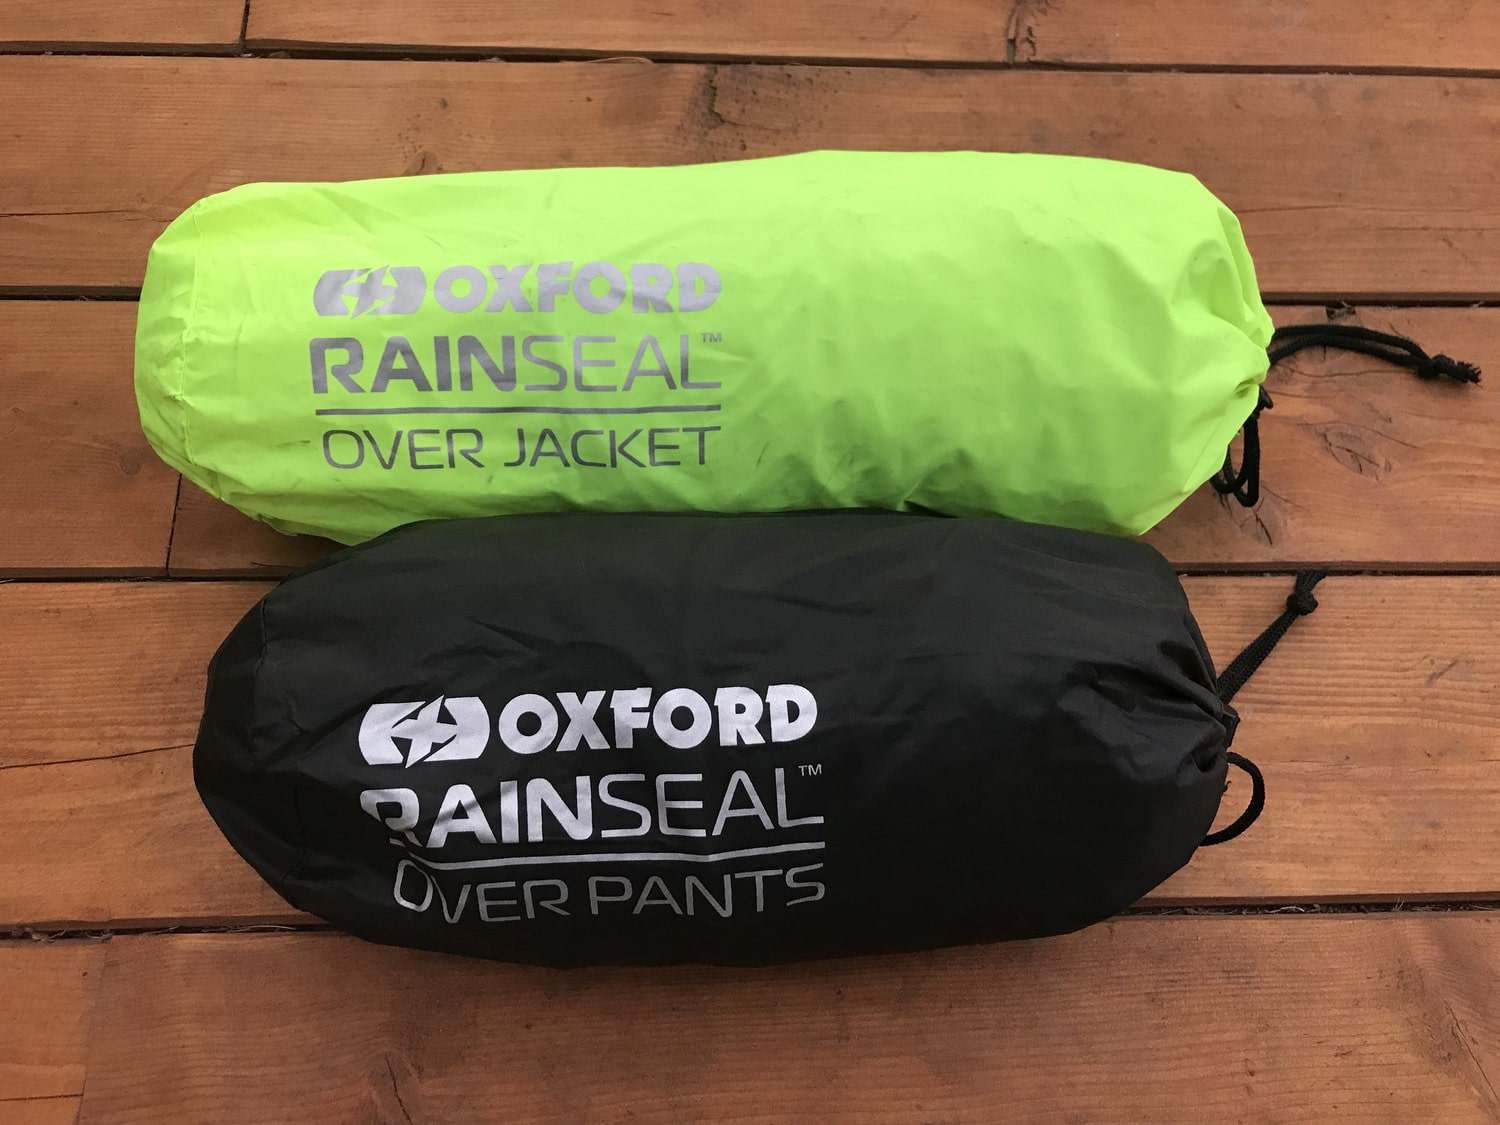 Oxford Rainseal distributed